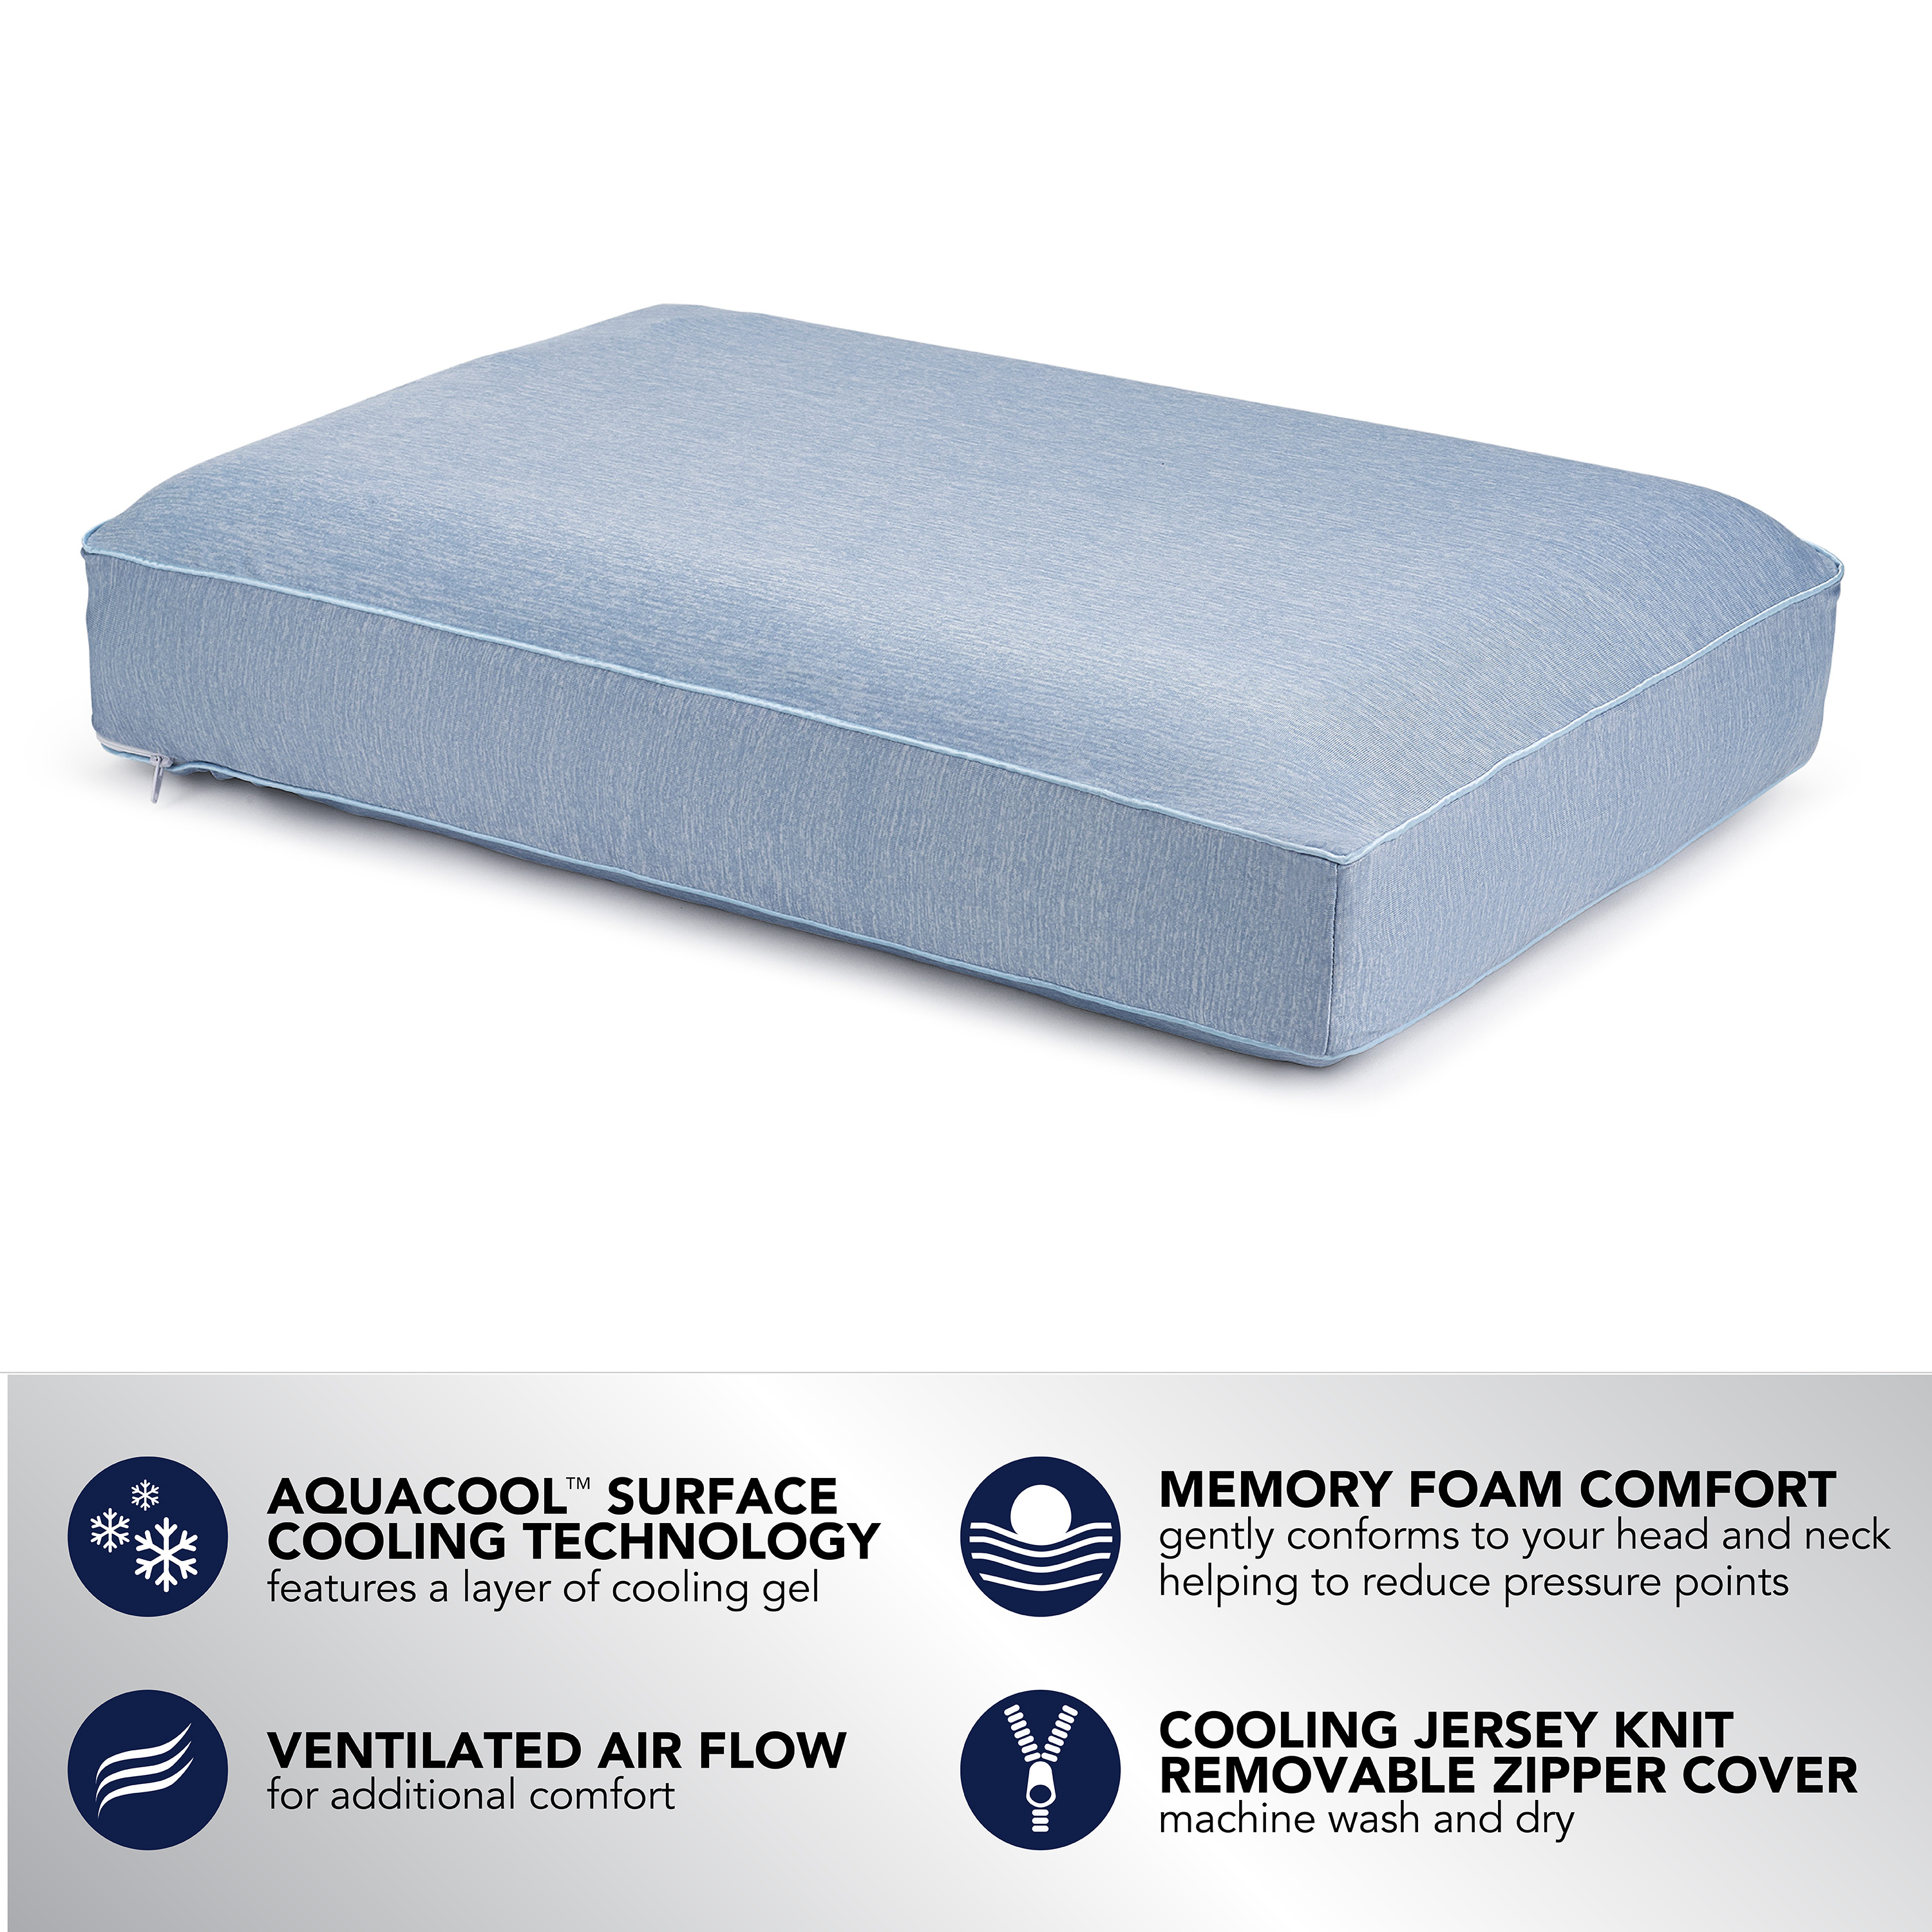 Beautyrest Silver Aquacool Memory Foam Pillow With Removable Cover, Standard/Queen - image 3 of 11